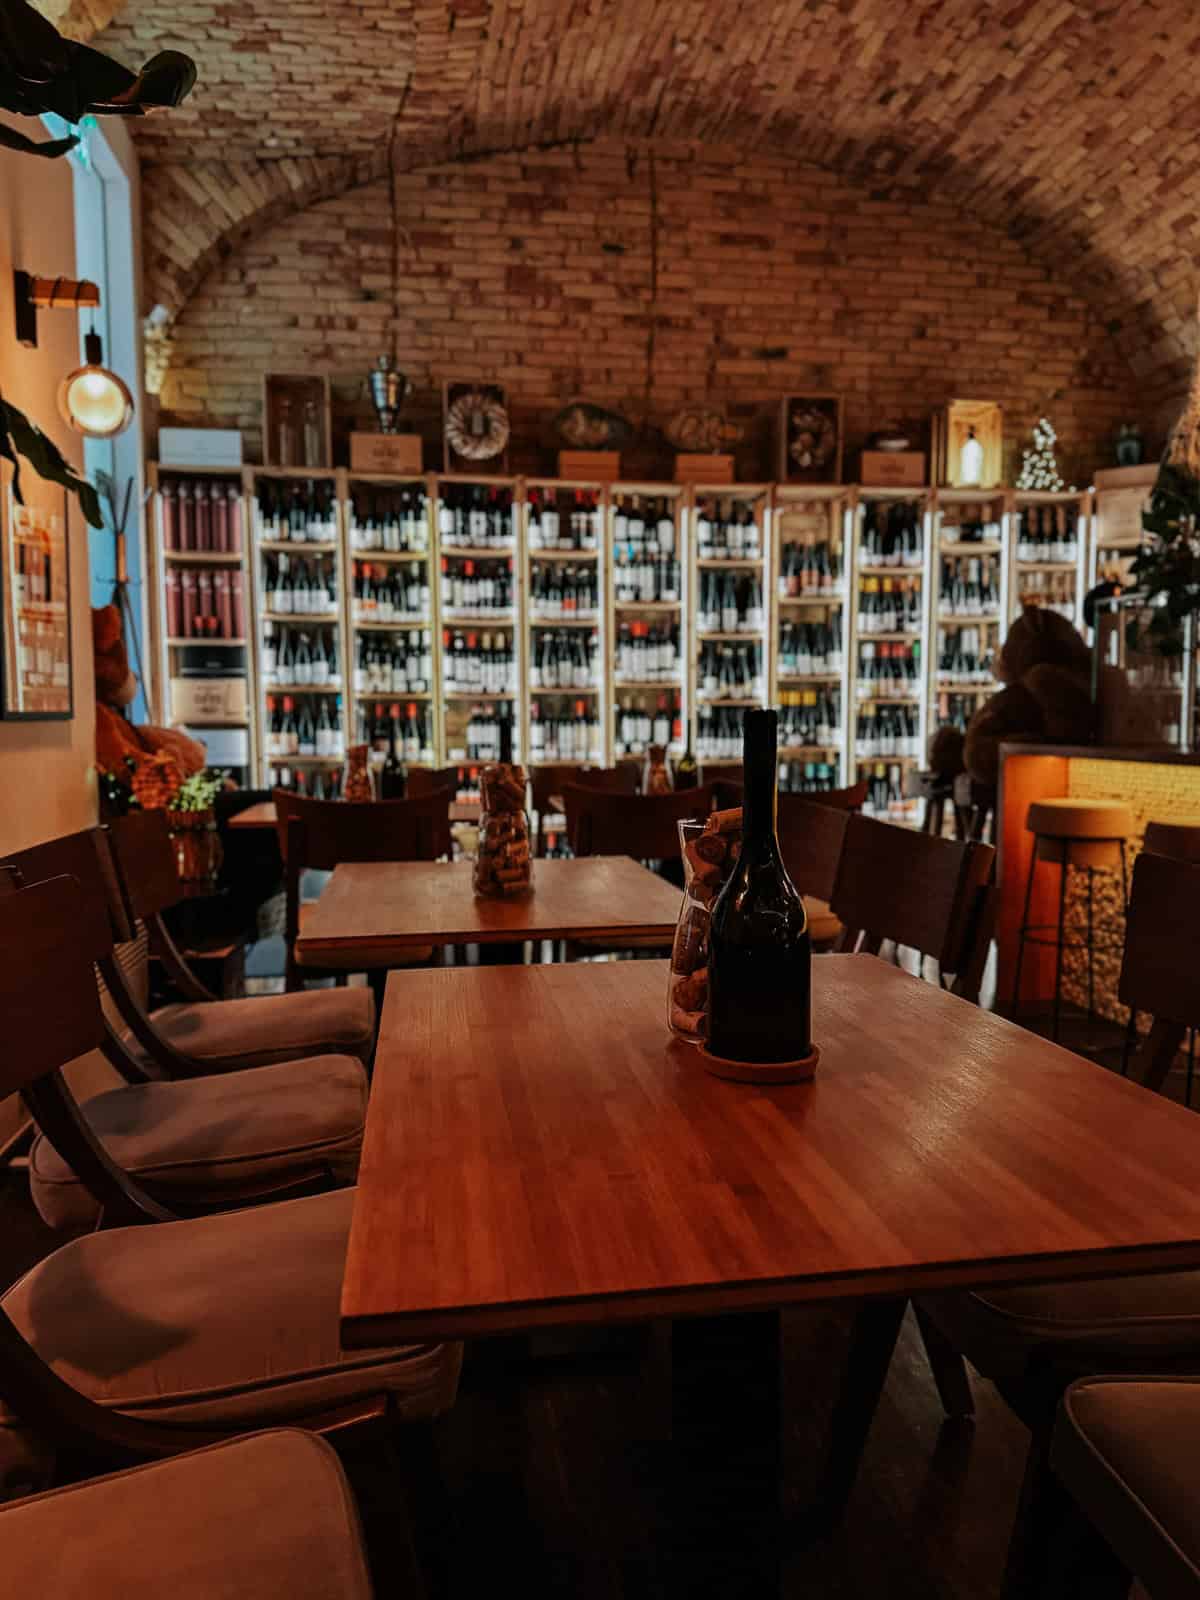 The interior of a wine bar with wooden tables, chairs, and shelves filled with wine bottles, creating a warm and inviting atmosphere.